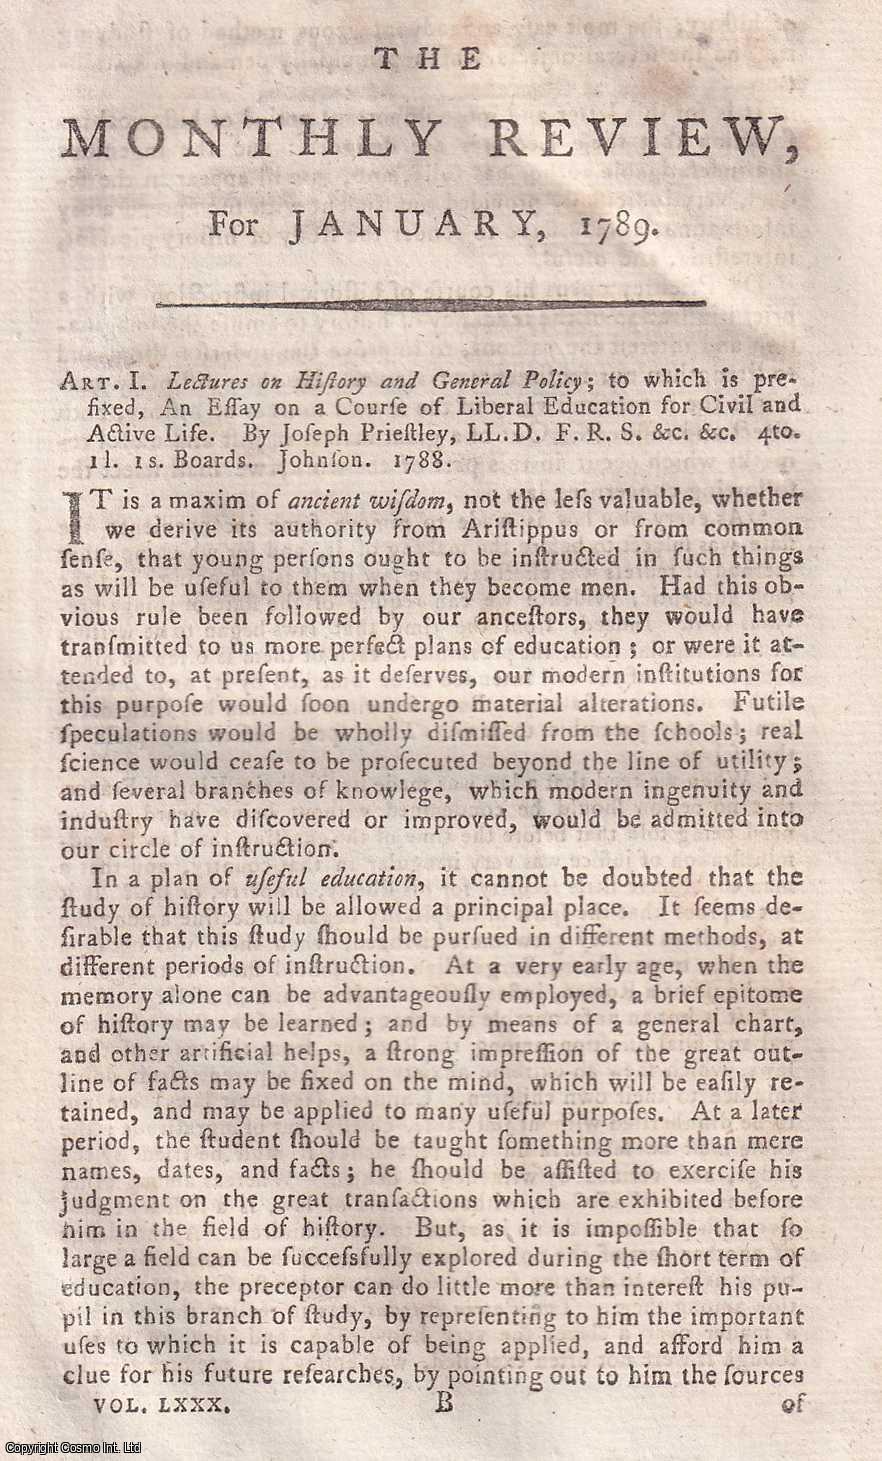 Author Not Stated - Lectures on History and General Policy, by Joseph Priestley. An original essay from the Monthly Review, 1789. No author is given for this article.